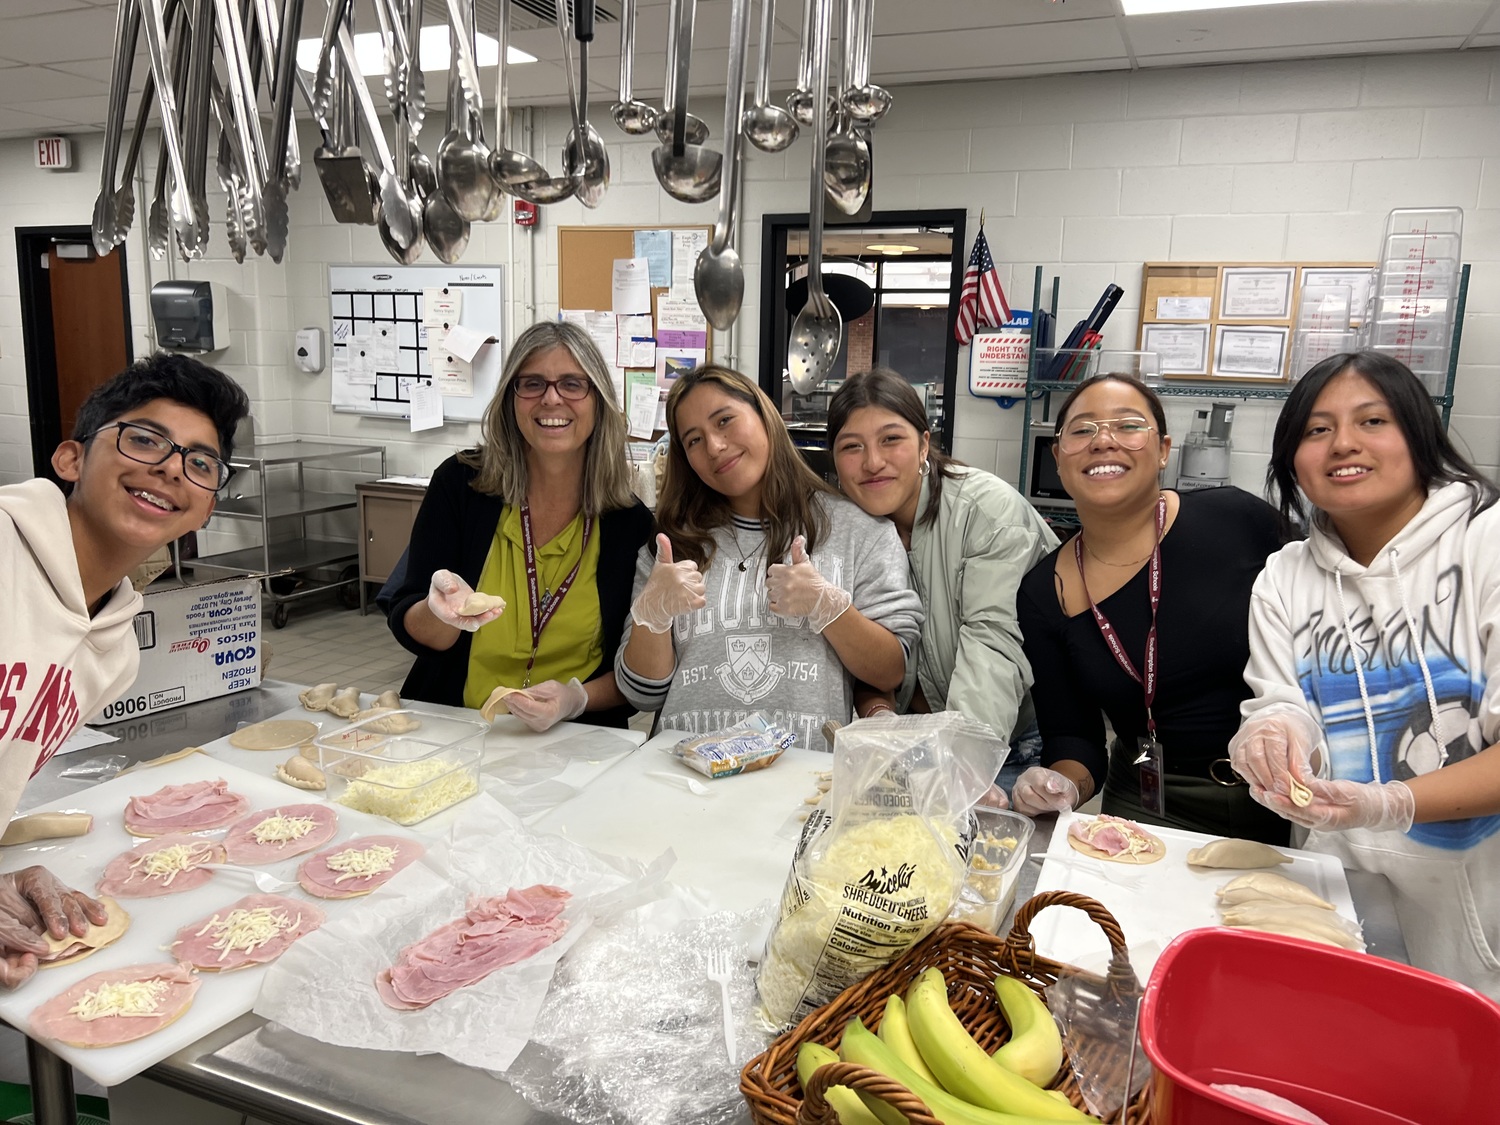 Members of Southampton High School’s Latino Culture Club made and sold empanadas as part of Hispanic Heritage Month. COURTESY SOUTHAMPTON SCHOOL DISTRICT